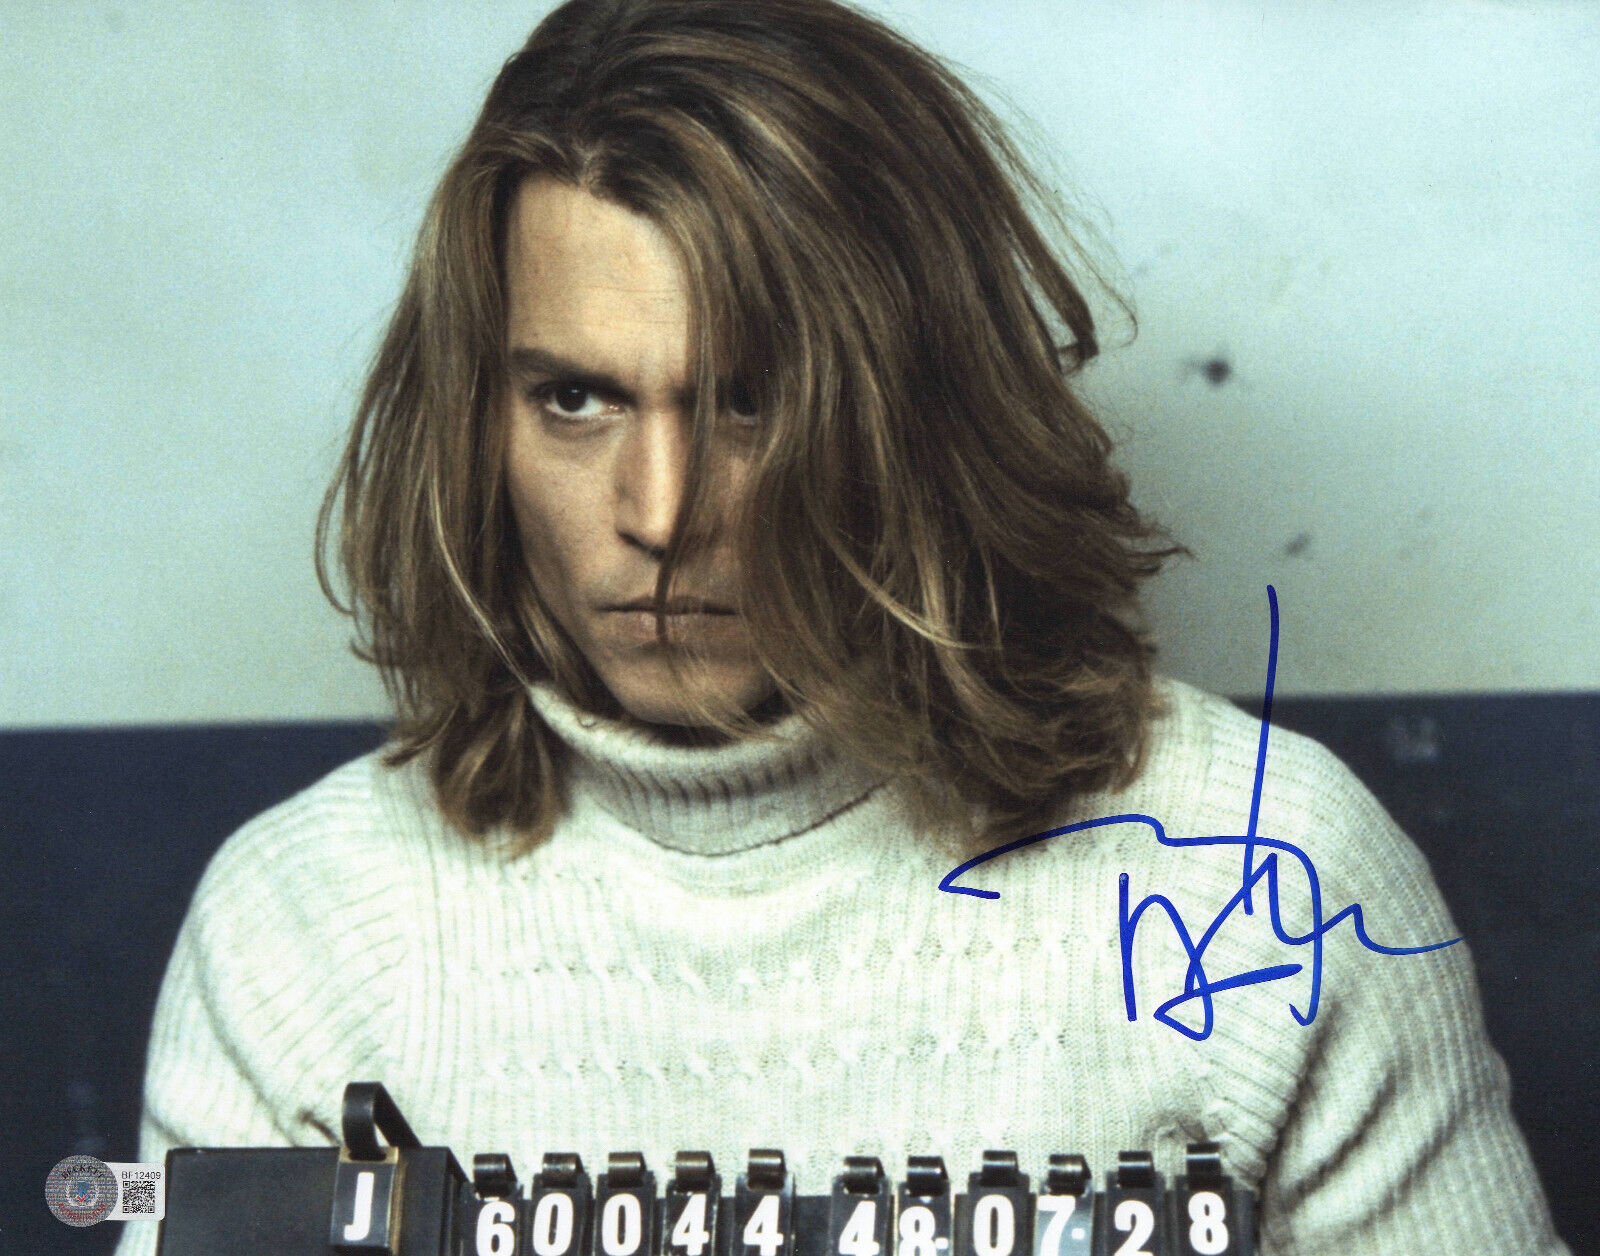 JOHNNY DEPP SIGNED BLOW 'GEORGE JUNG' 11X14 PHOTO AUTHENTIC AUTOGRAPH BECKETT